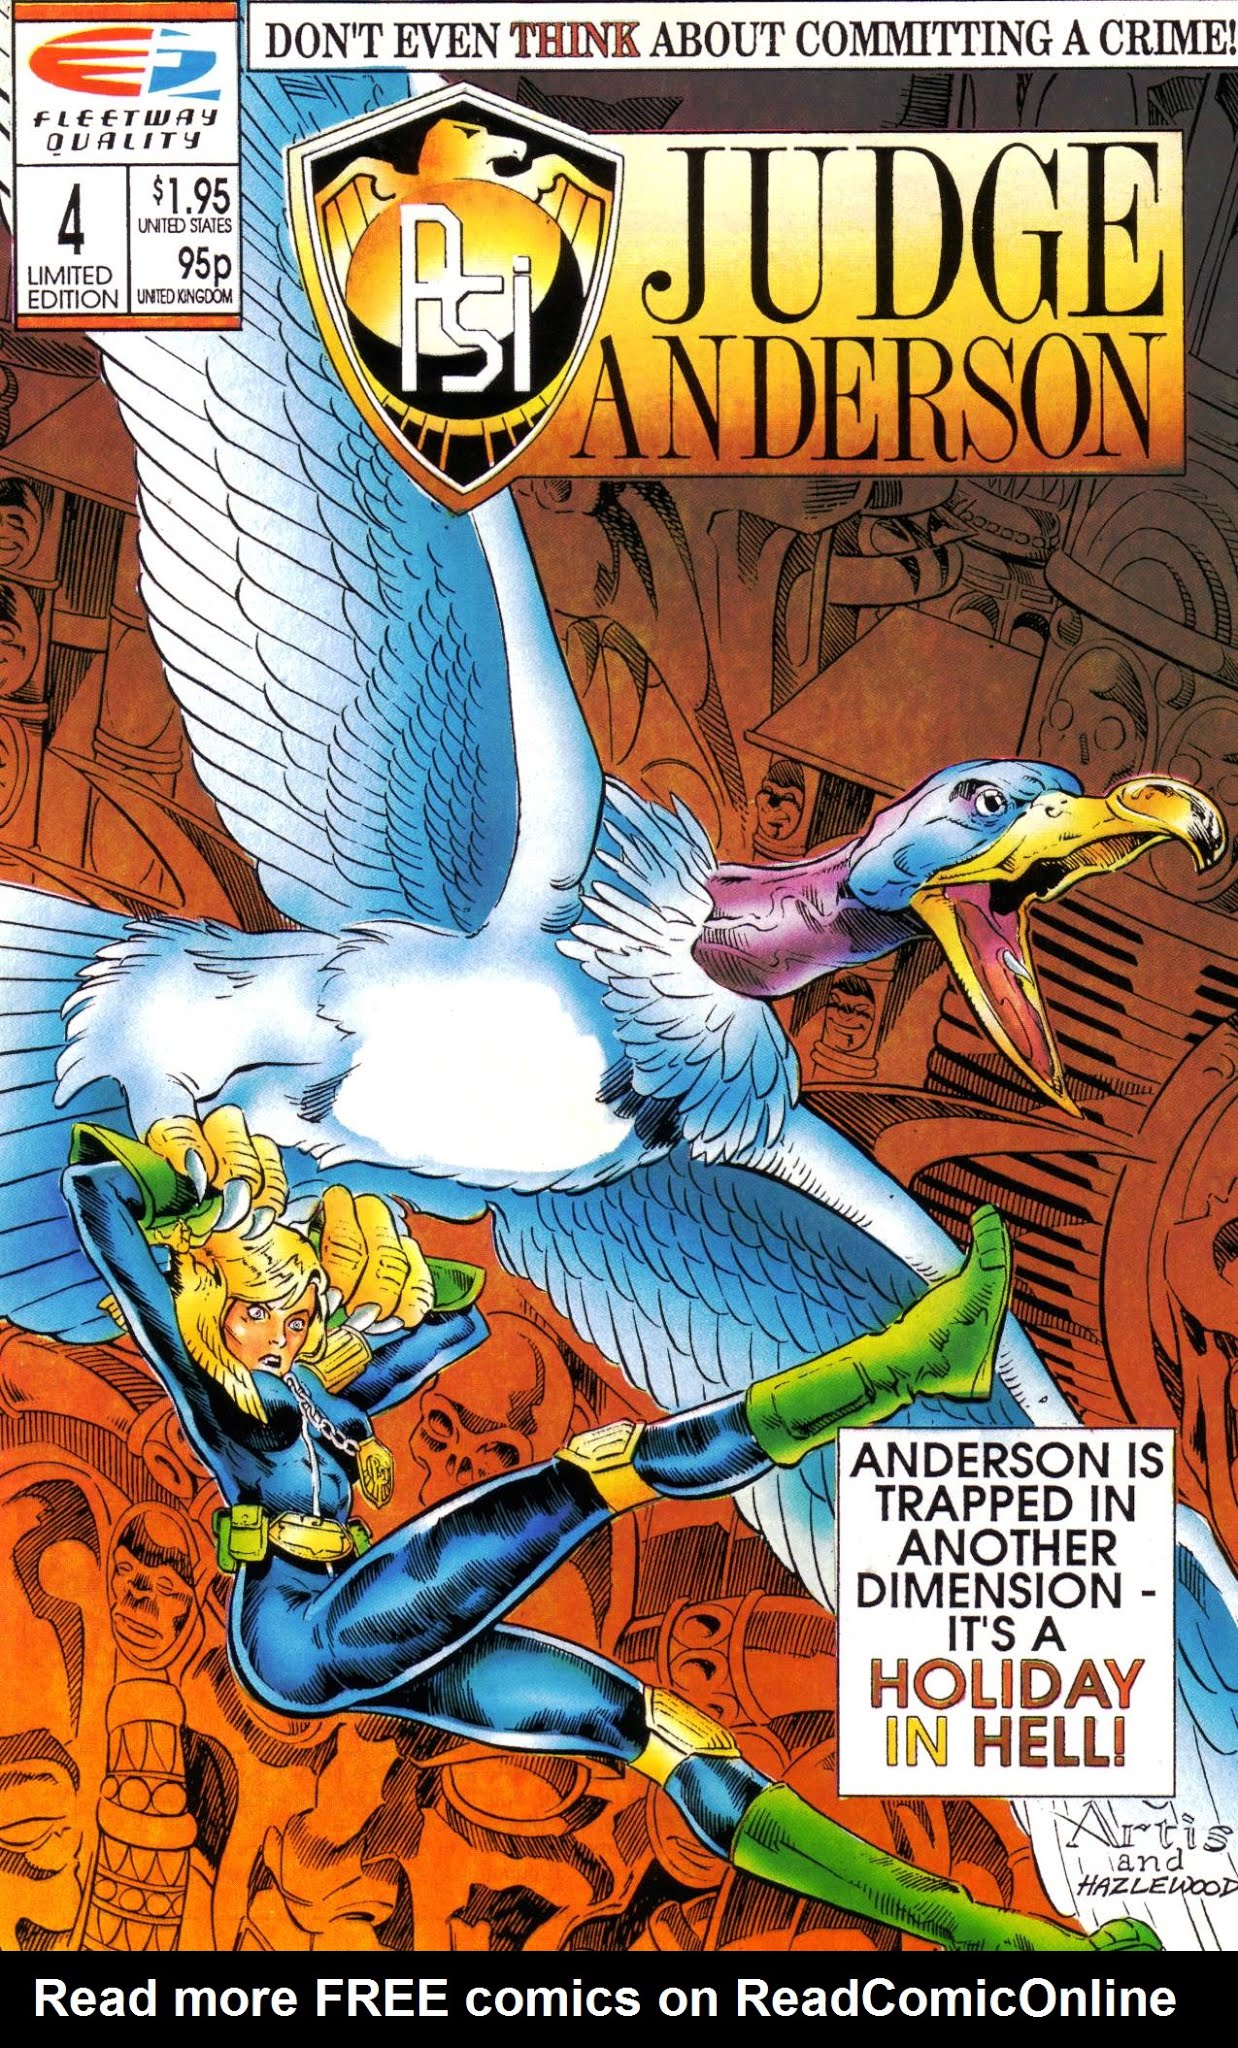 Read online Psi-Judge Anderson comic -  Issue #4 - 1